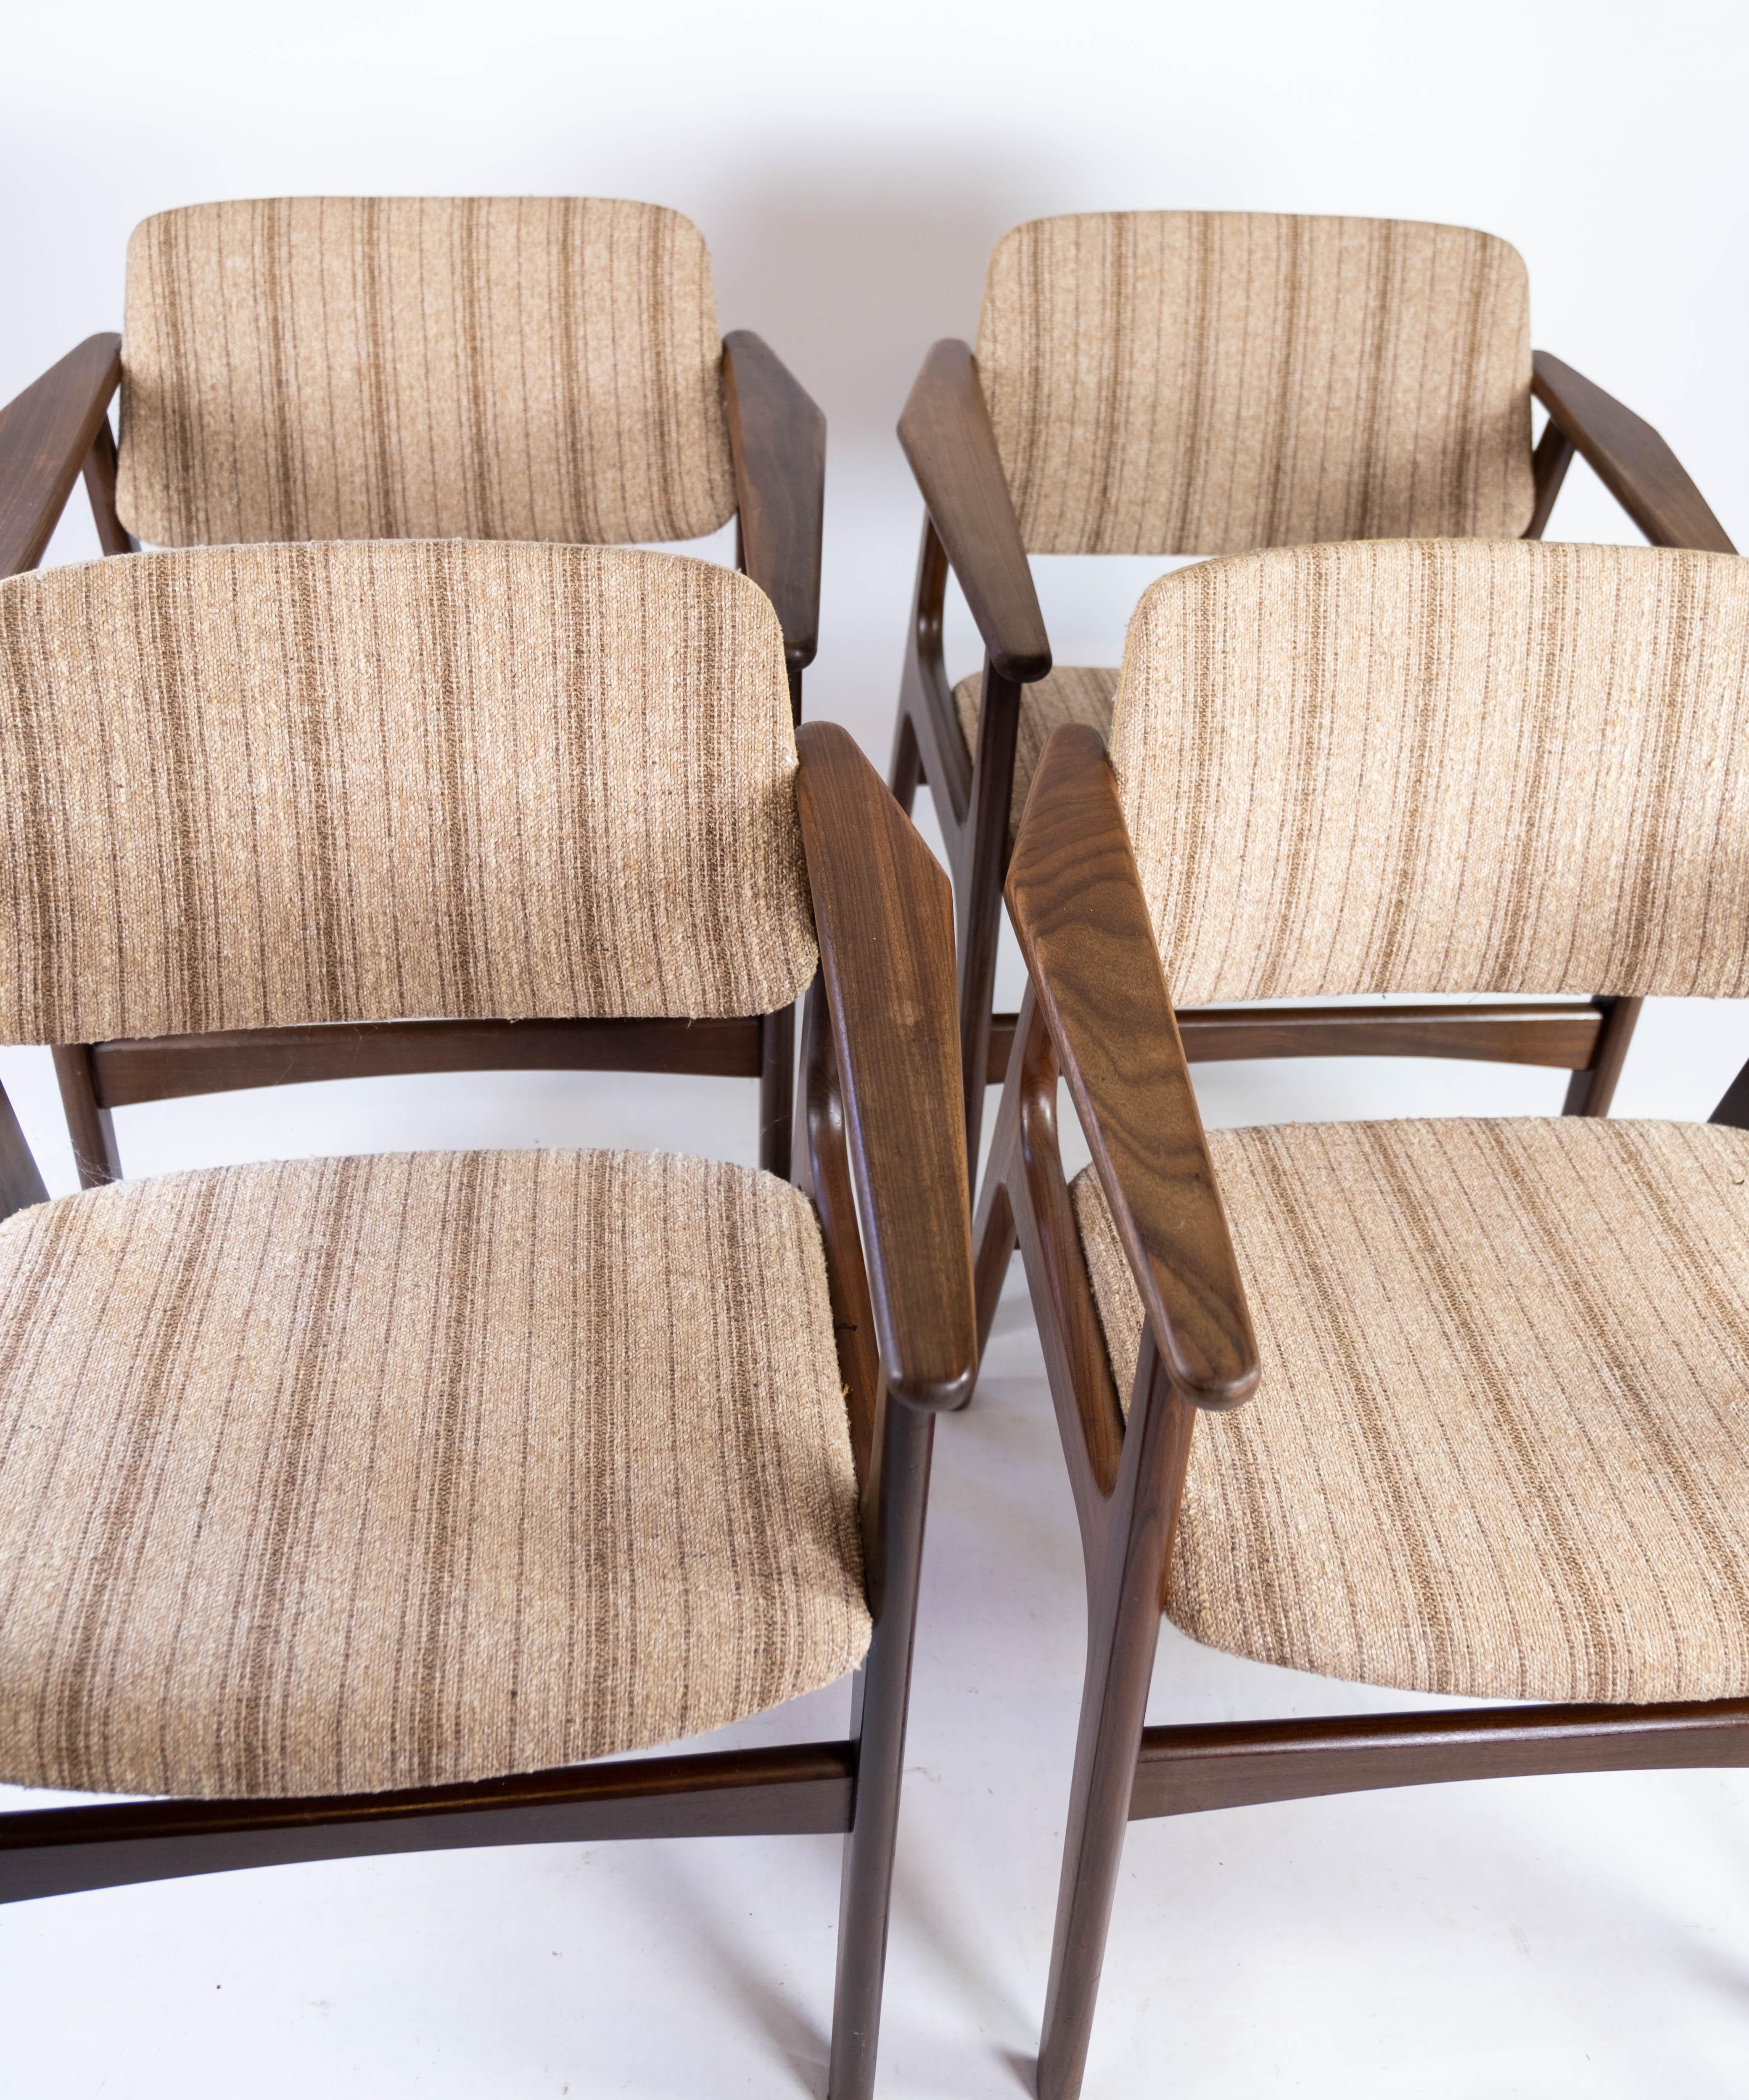 This set of four teak dining chairs, known as model 